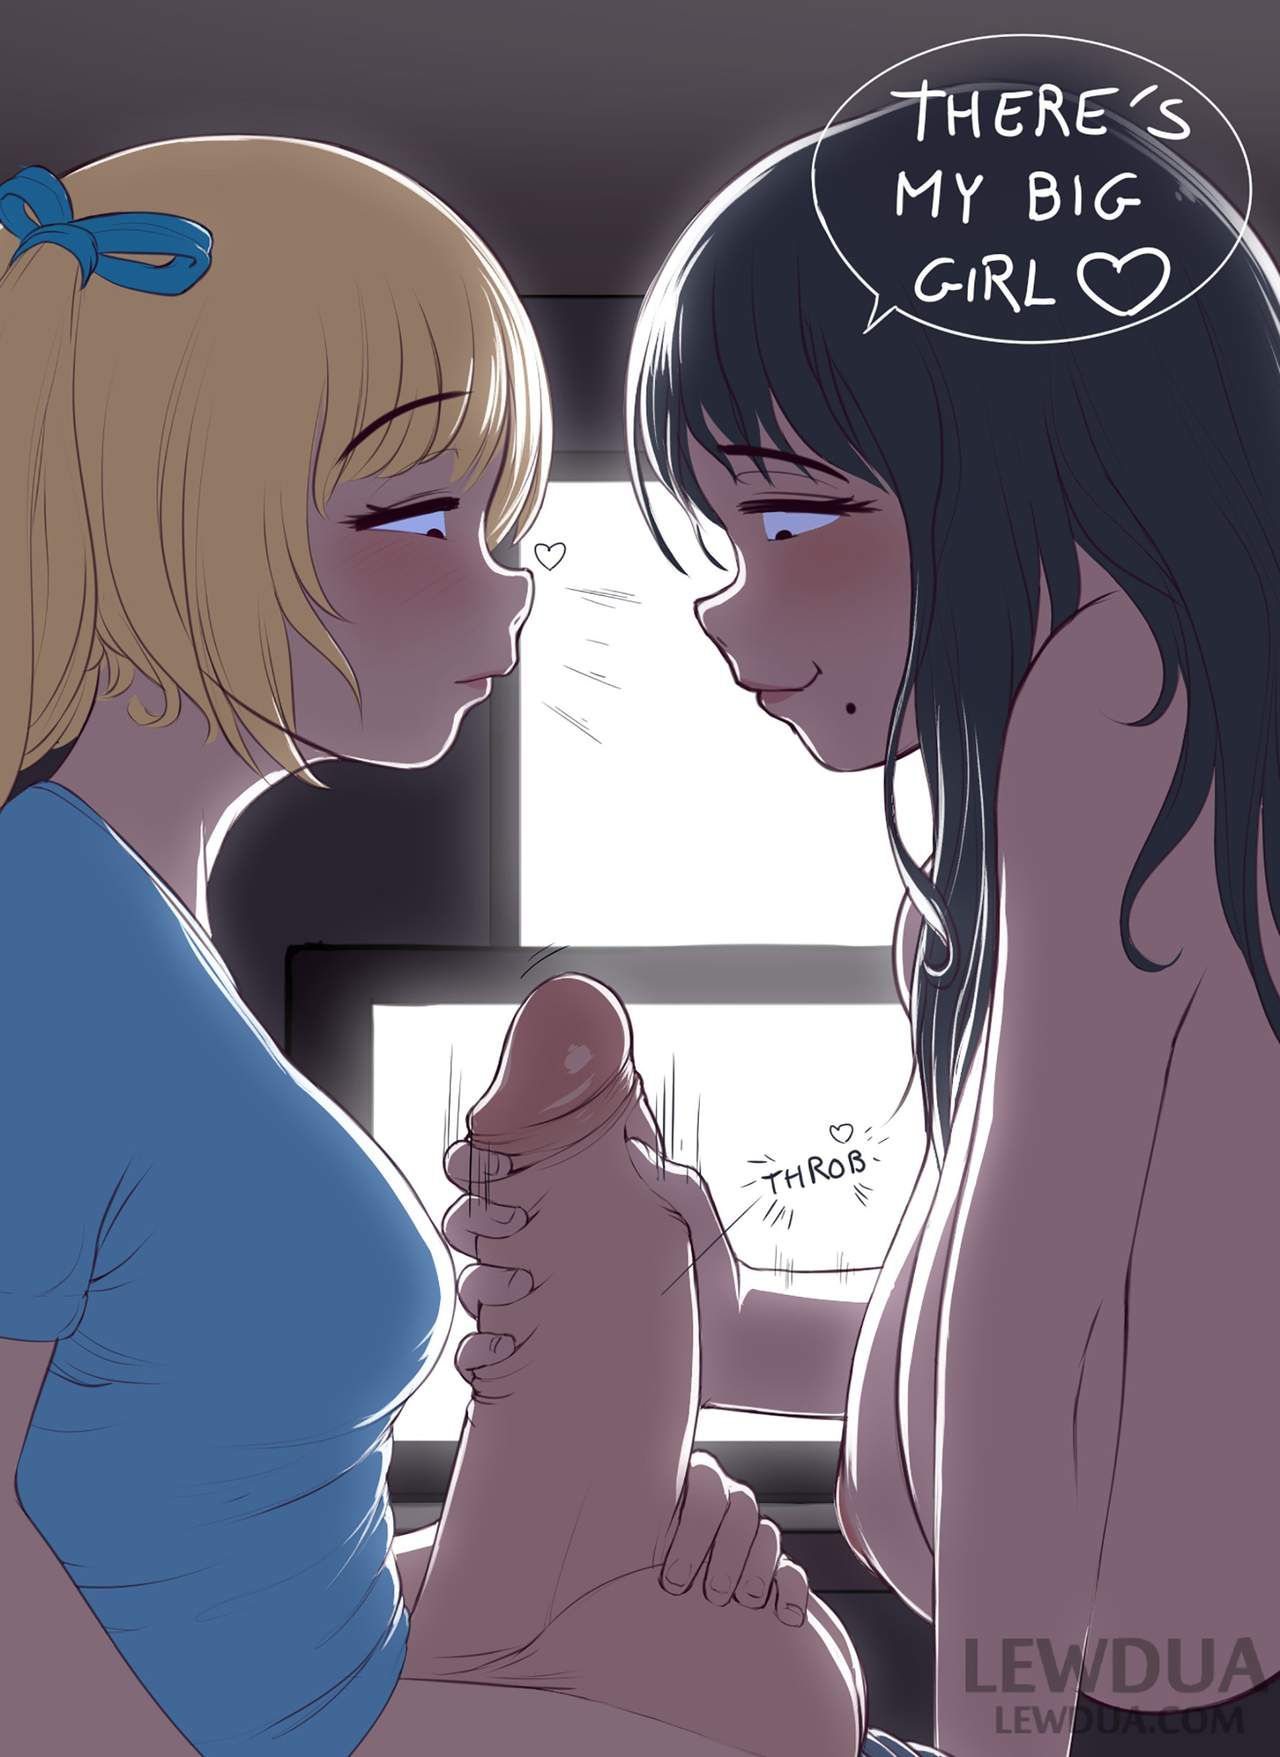 [Lewdua] Love is Sharing - Nessie and Alison 2